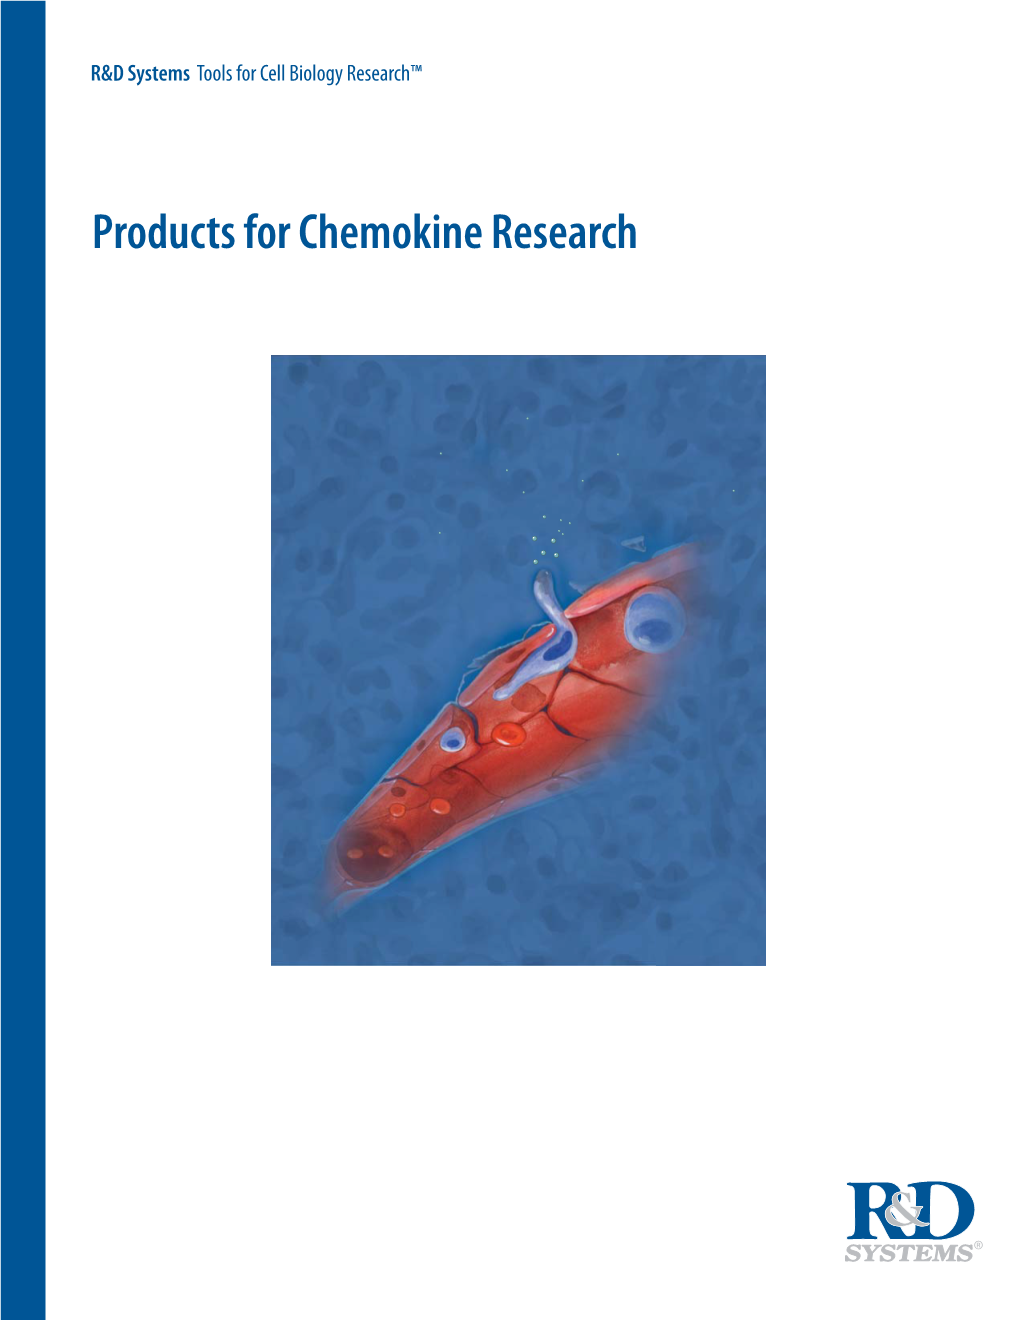 Products for Chemokine Research